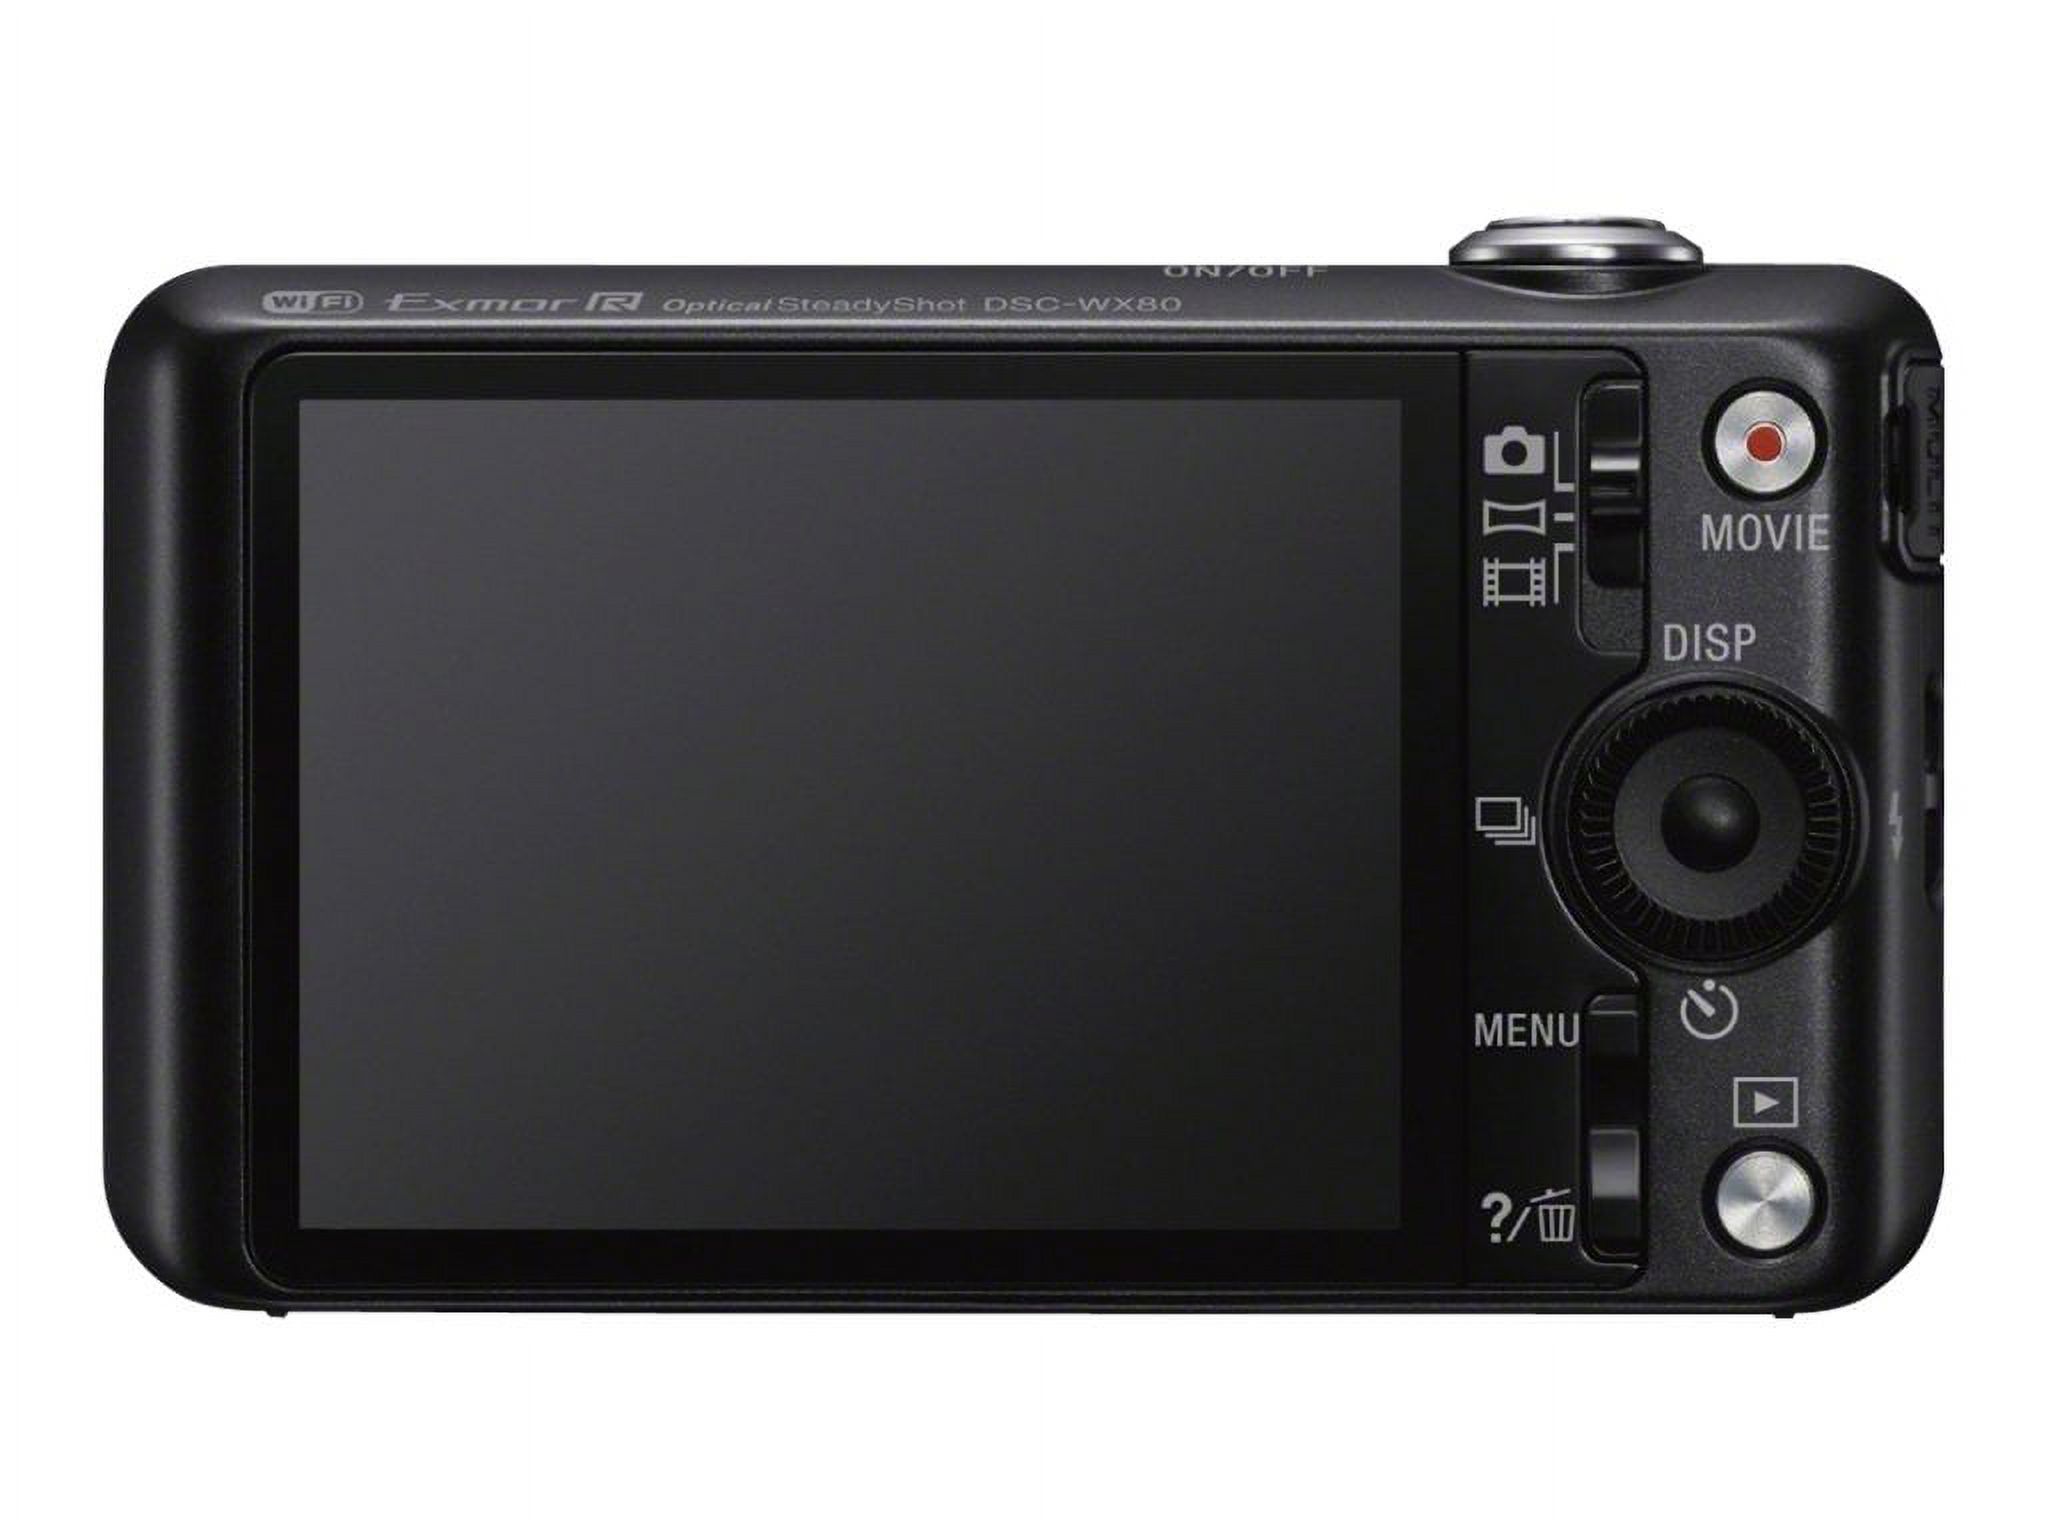 Sony Cyber-shot DSC-WX80 - Digital camera - compact - 16.2 MP - 8x optical zoom - Carl Zeiss - Wi-Fi - white - image 4 of 4